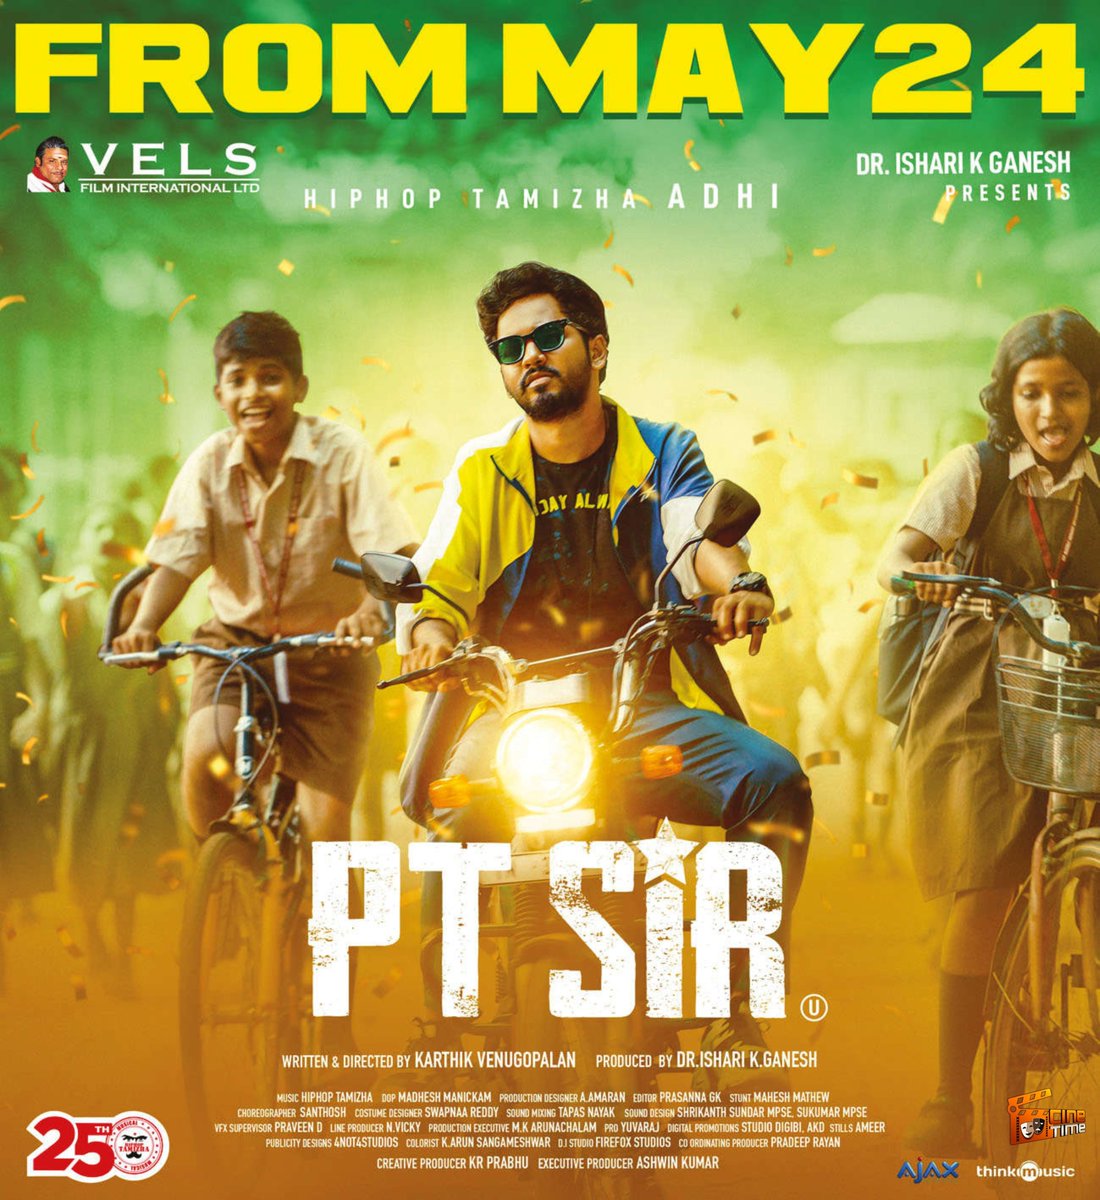 .@hiphoptamizha's #PTSir from May 24th! Positive reports from those who already watched this flick! Gonna be a super positive film for Vels this year!